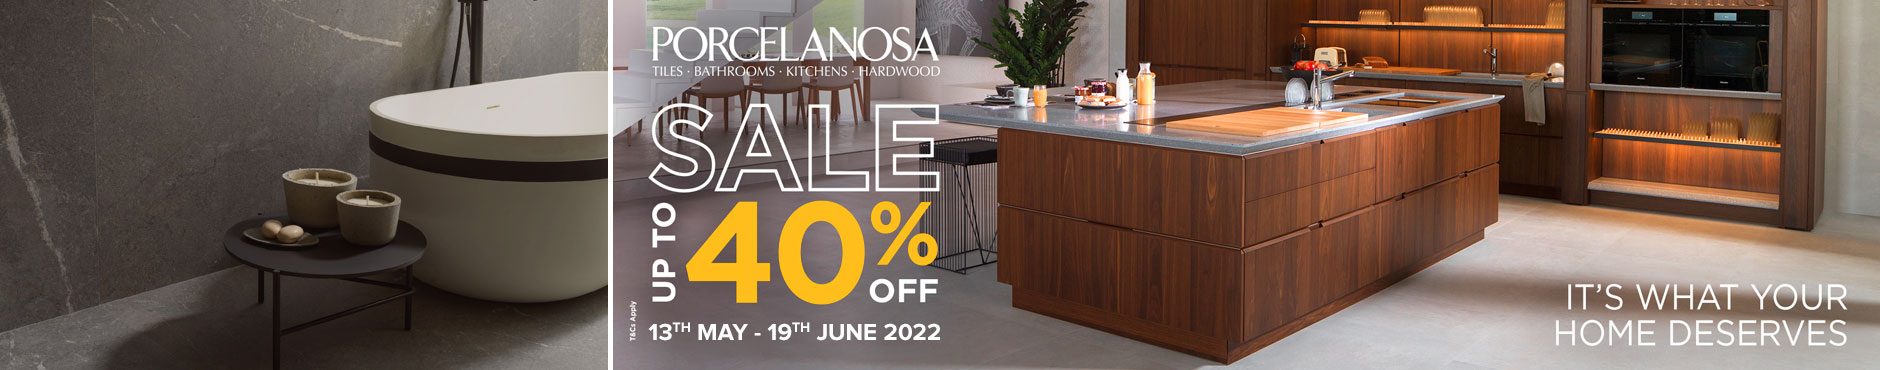 Porcelanosa sale - 13th May - 19th June 2022